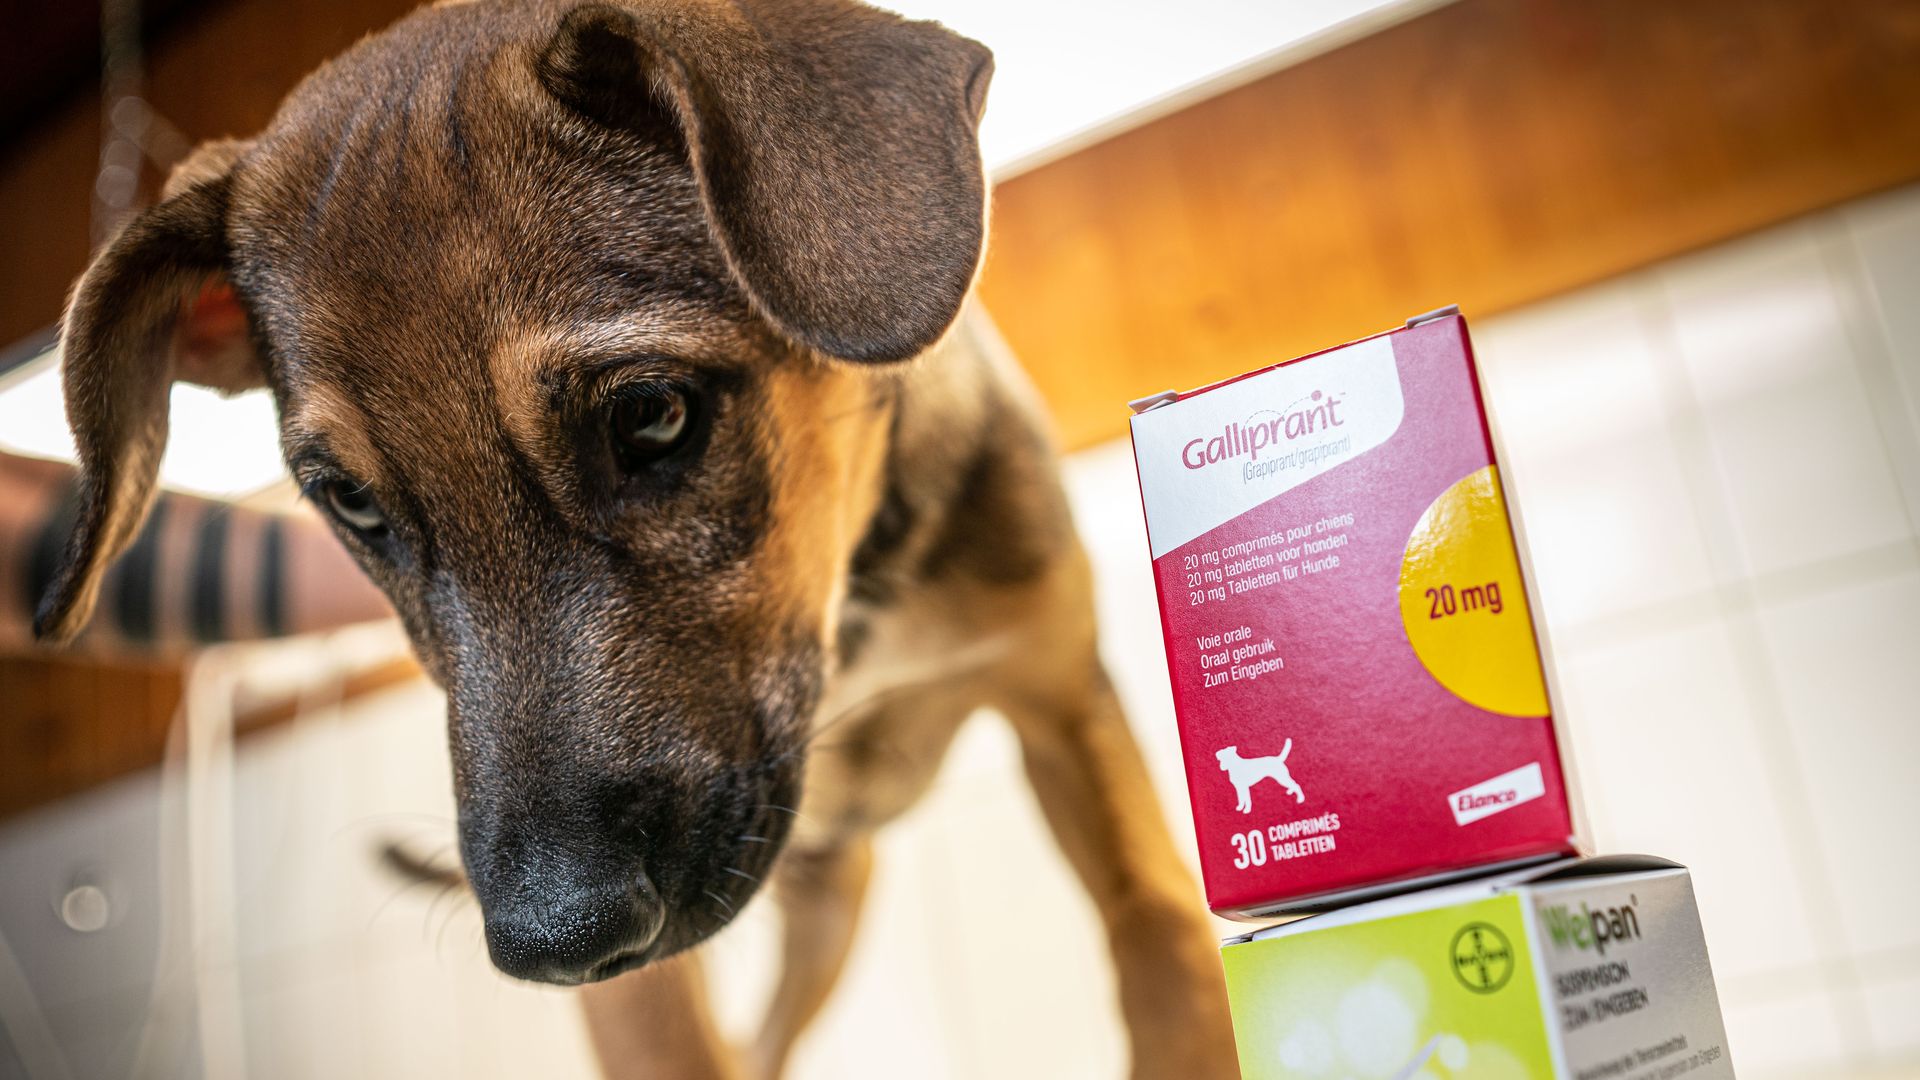 a dog standing next to animal medication produced by Elanco (top) and Bayer at a veterinary practice